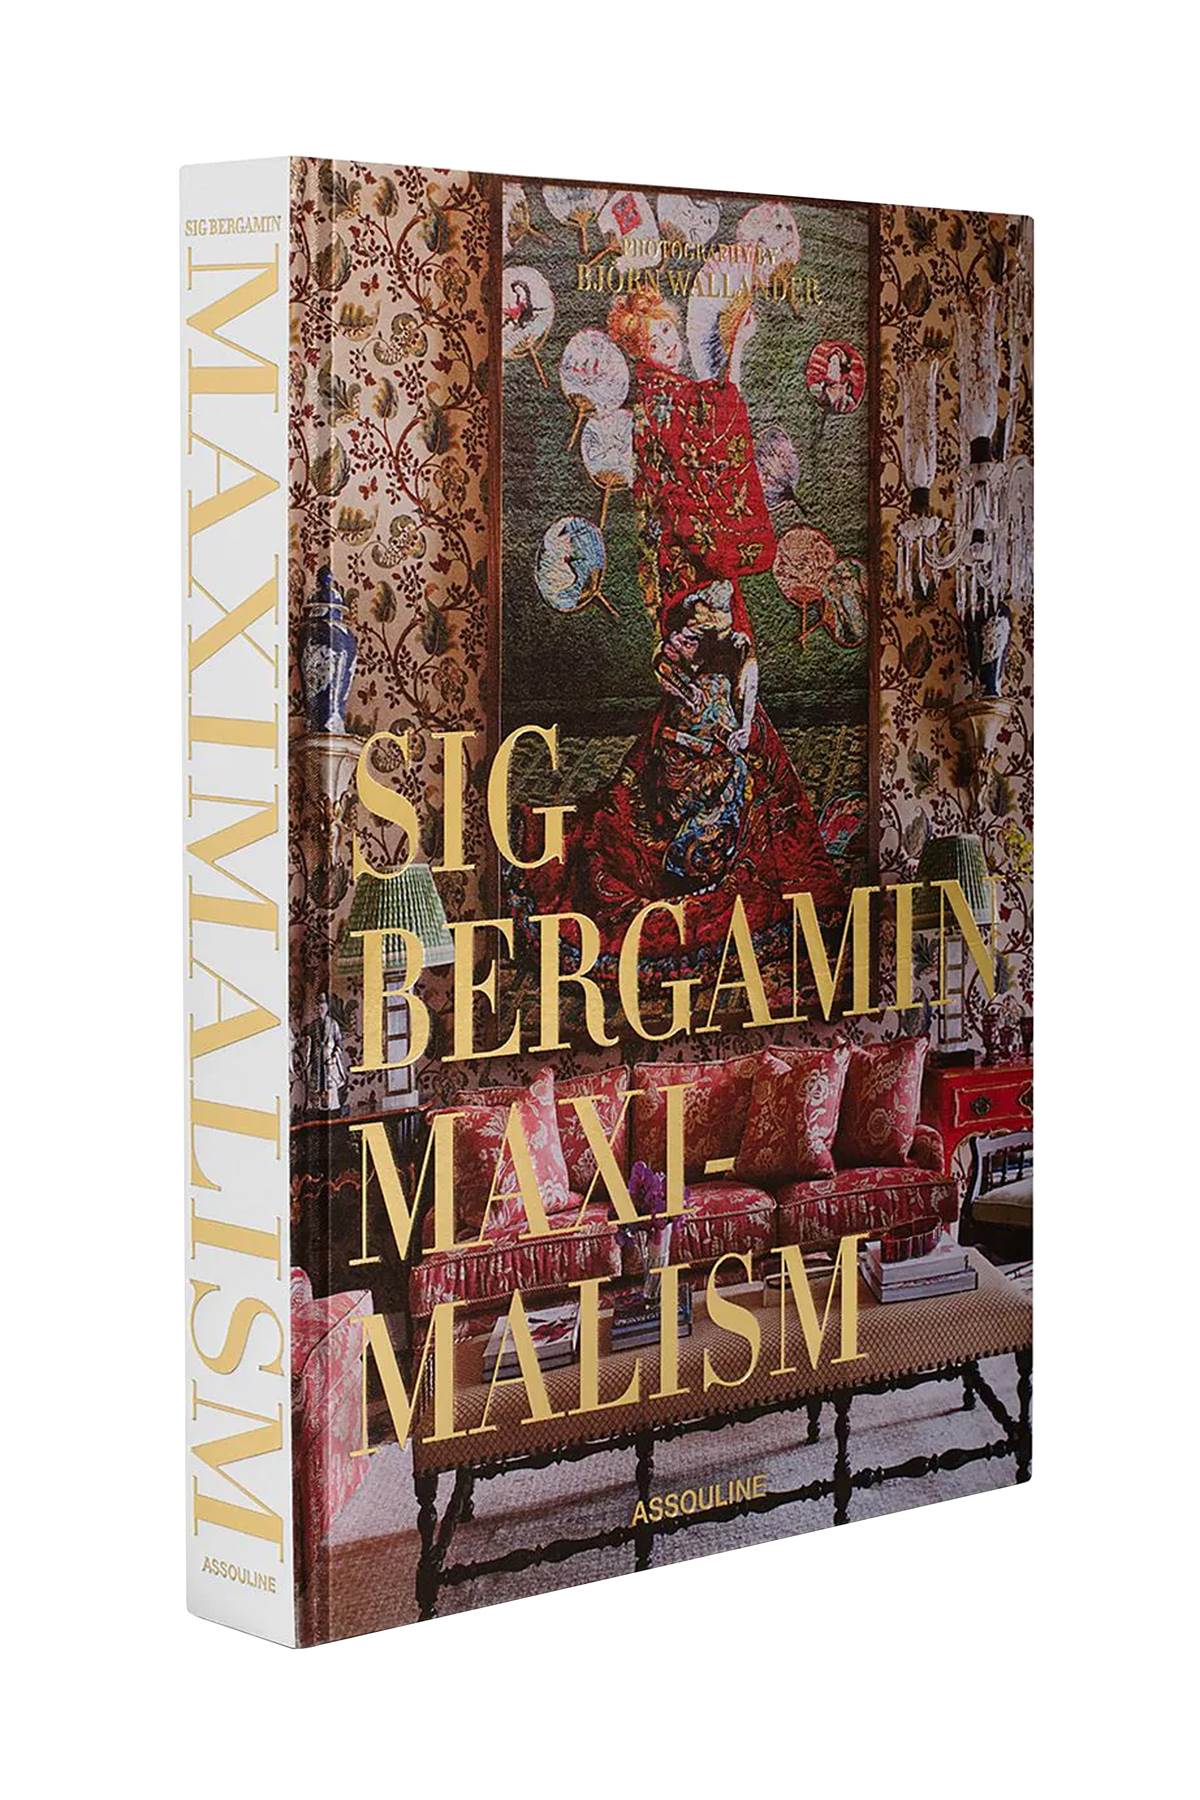 Assouline "maximalism by sig-2